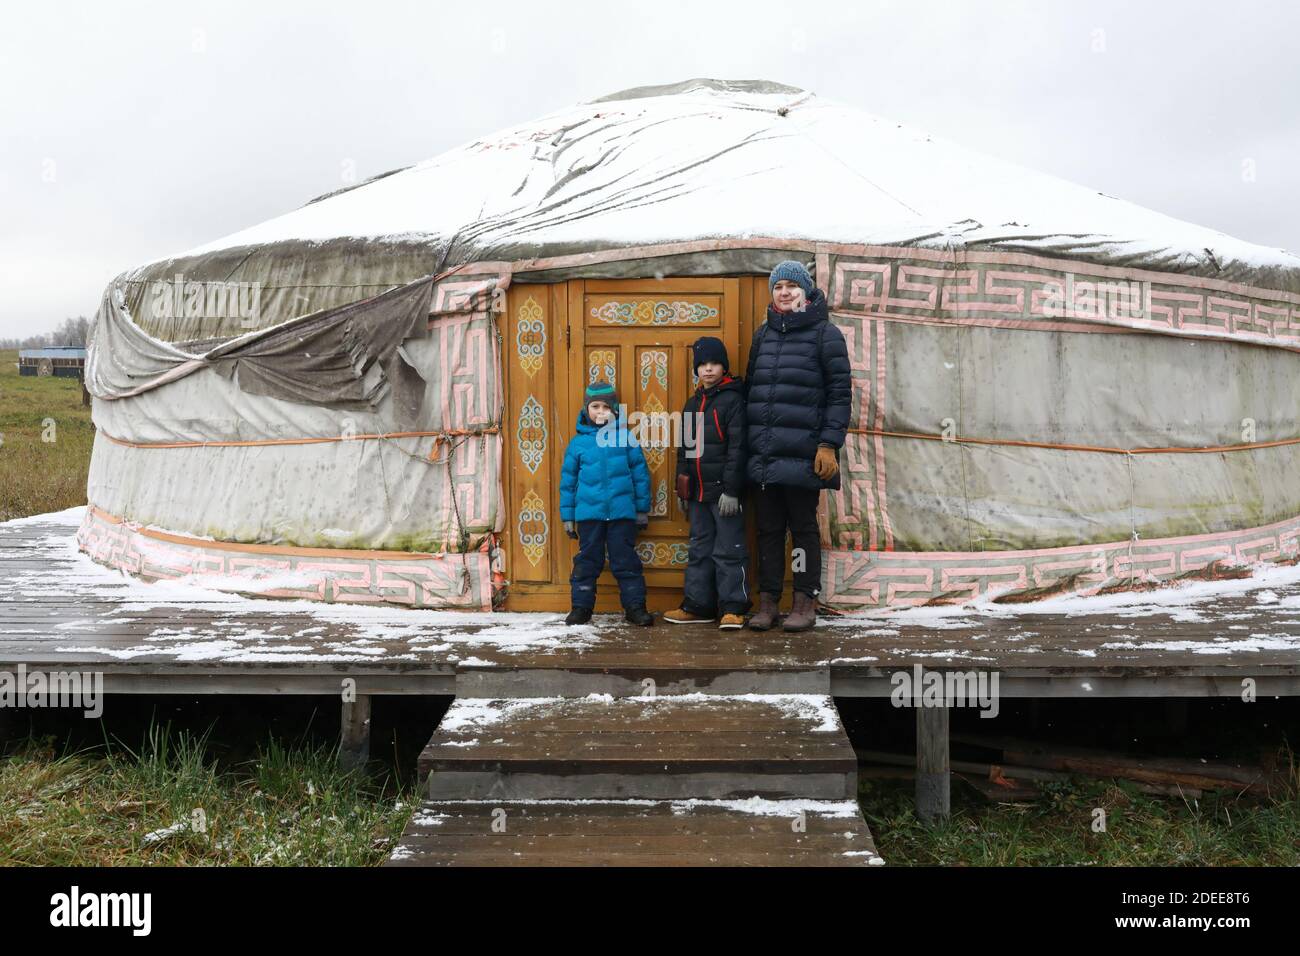 Family in front of Yakut yurt in spring, Russia Stock Photo